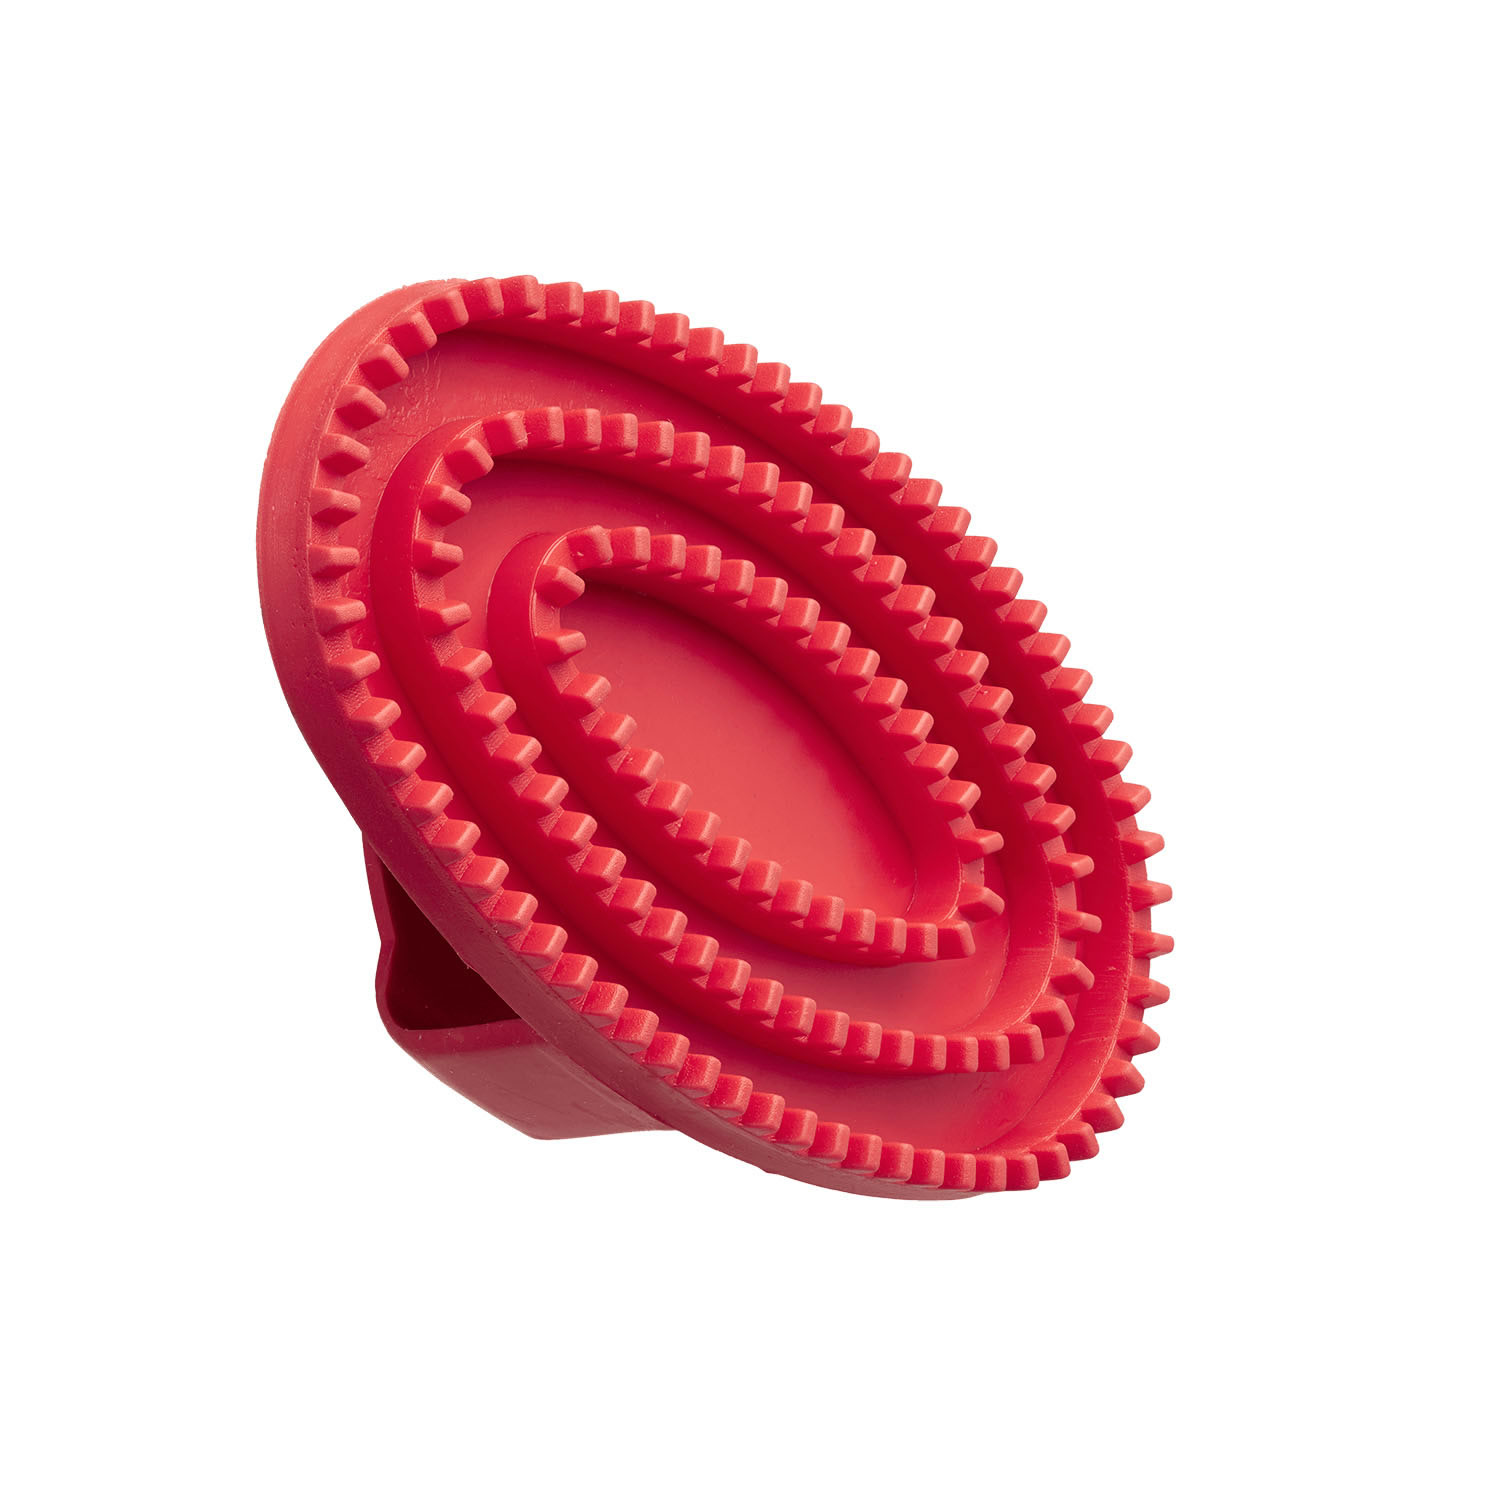 BITZ CURRY COMB RUBBER SMALL RED SMALL